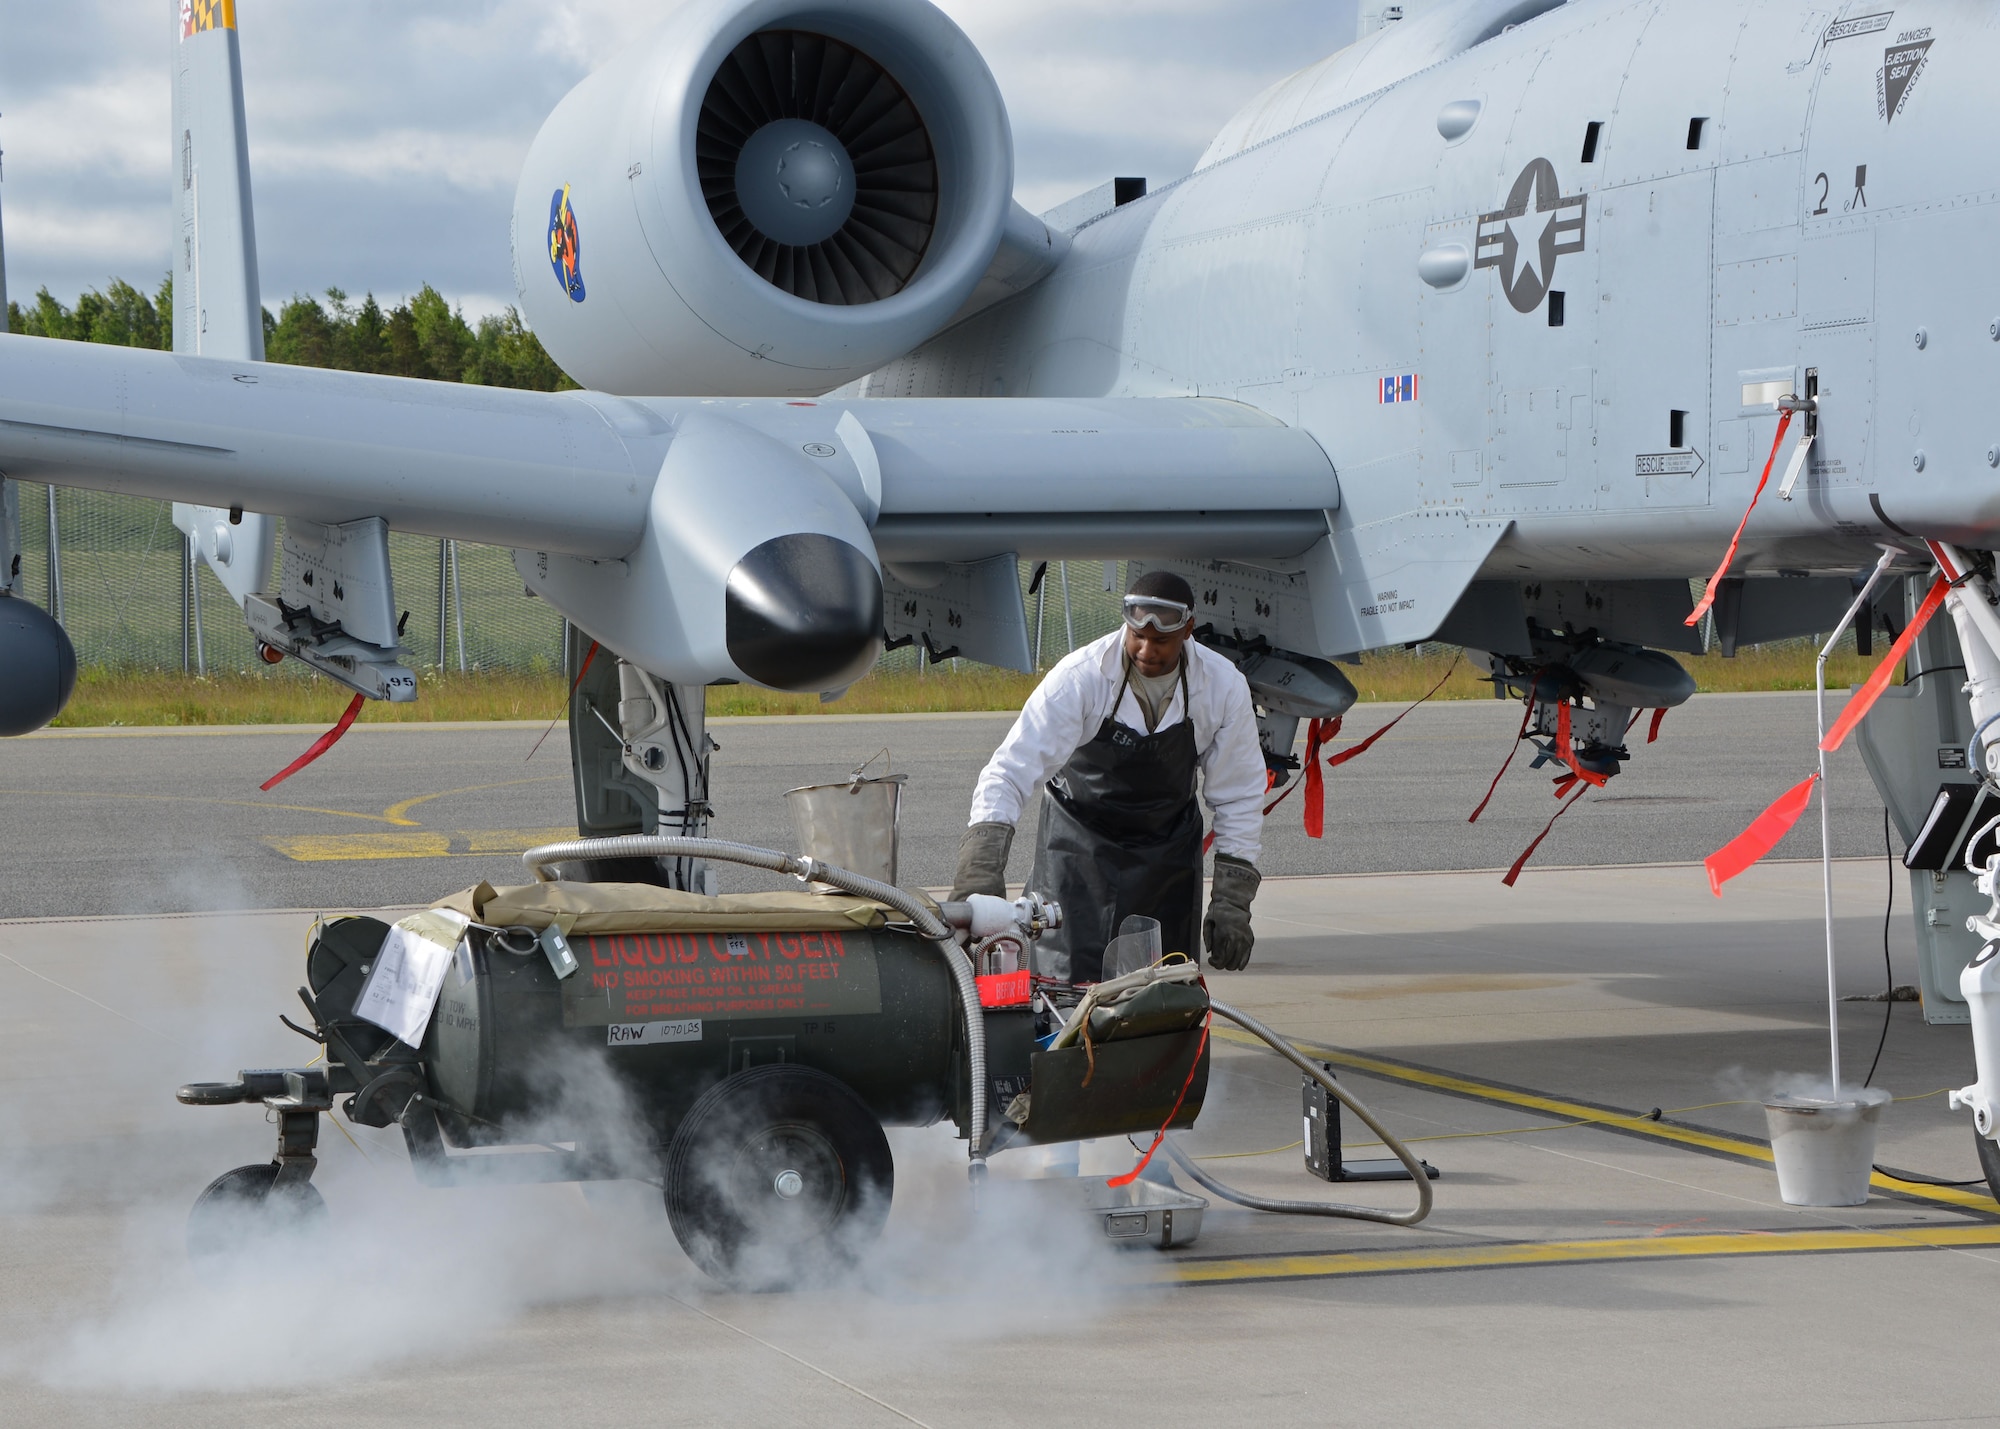 A crew chief assigned to the 175th Aircraft Maintenance Squadron, Maryland Air National Guard, services an A-10C Thunderbolt II aircraft with liquid oxygen during Saber Strike 15, Ämari Air Base, Estonia, June 8, 2015. Saber Strike is an exercise that aims to continue to improve U.S. interoperability with ally and partner nations, while increasing their capacity to conduct a full spectrum of military operations.  (Air National Guard photo by Tech. Sgt. Christopher Schepers)